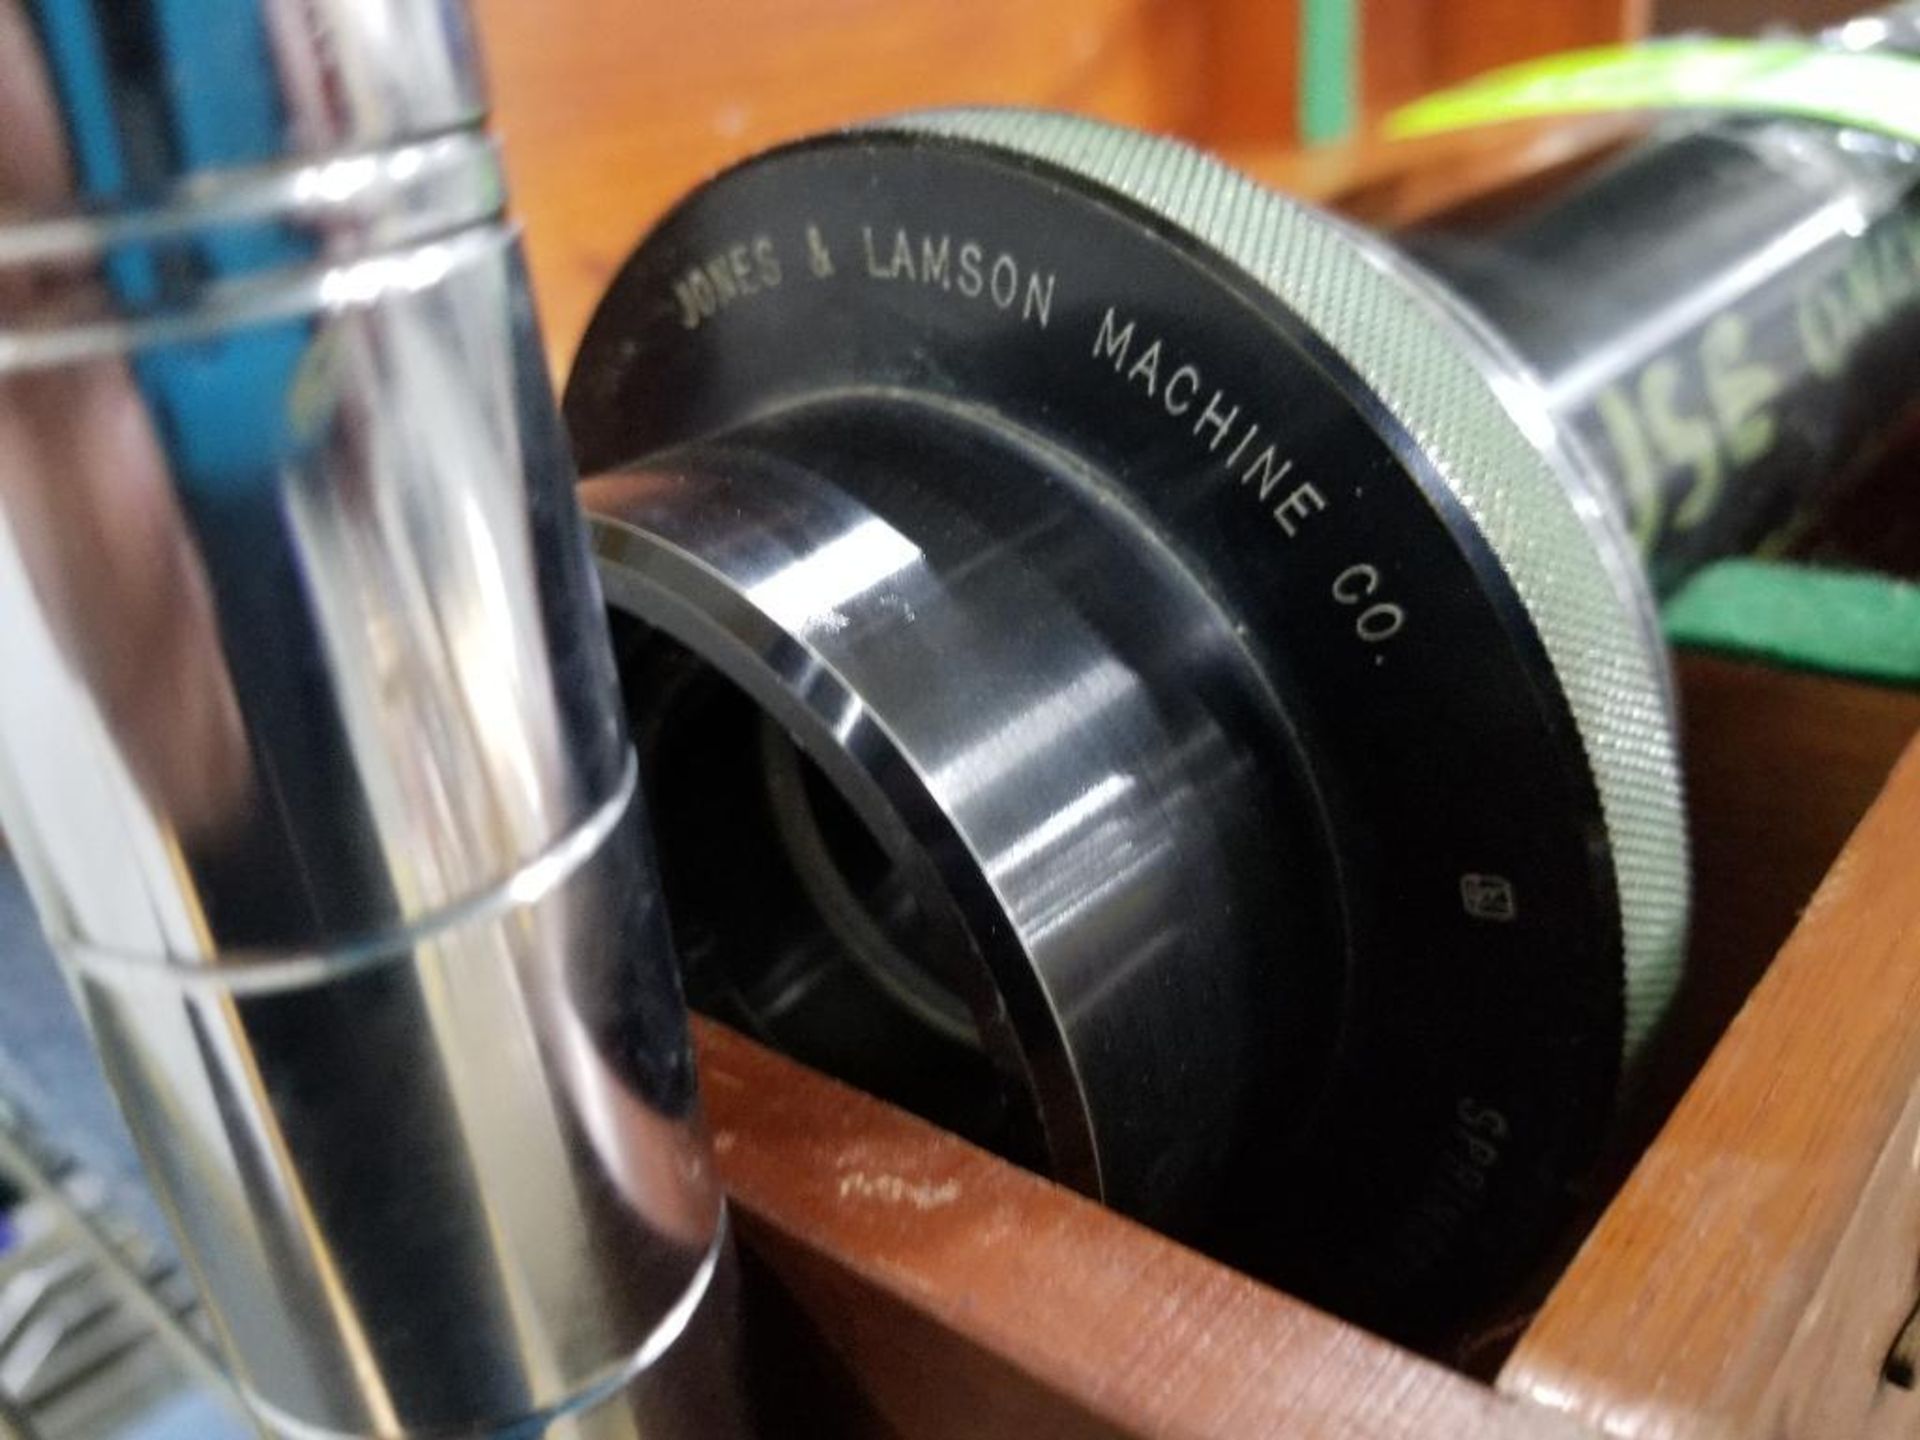 Jones and Lamson optical comparator magnification lense. - Image 2 of 4